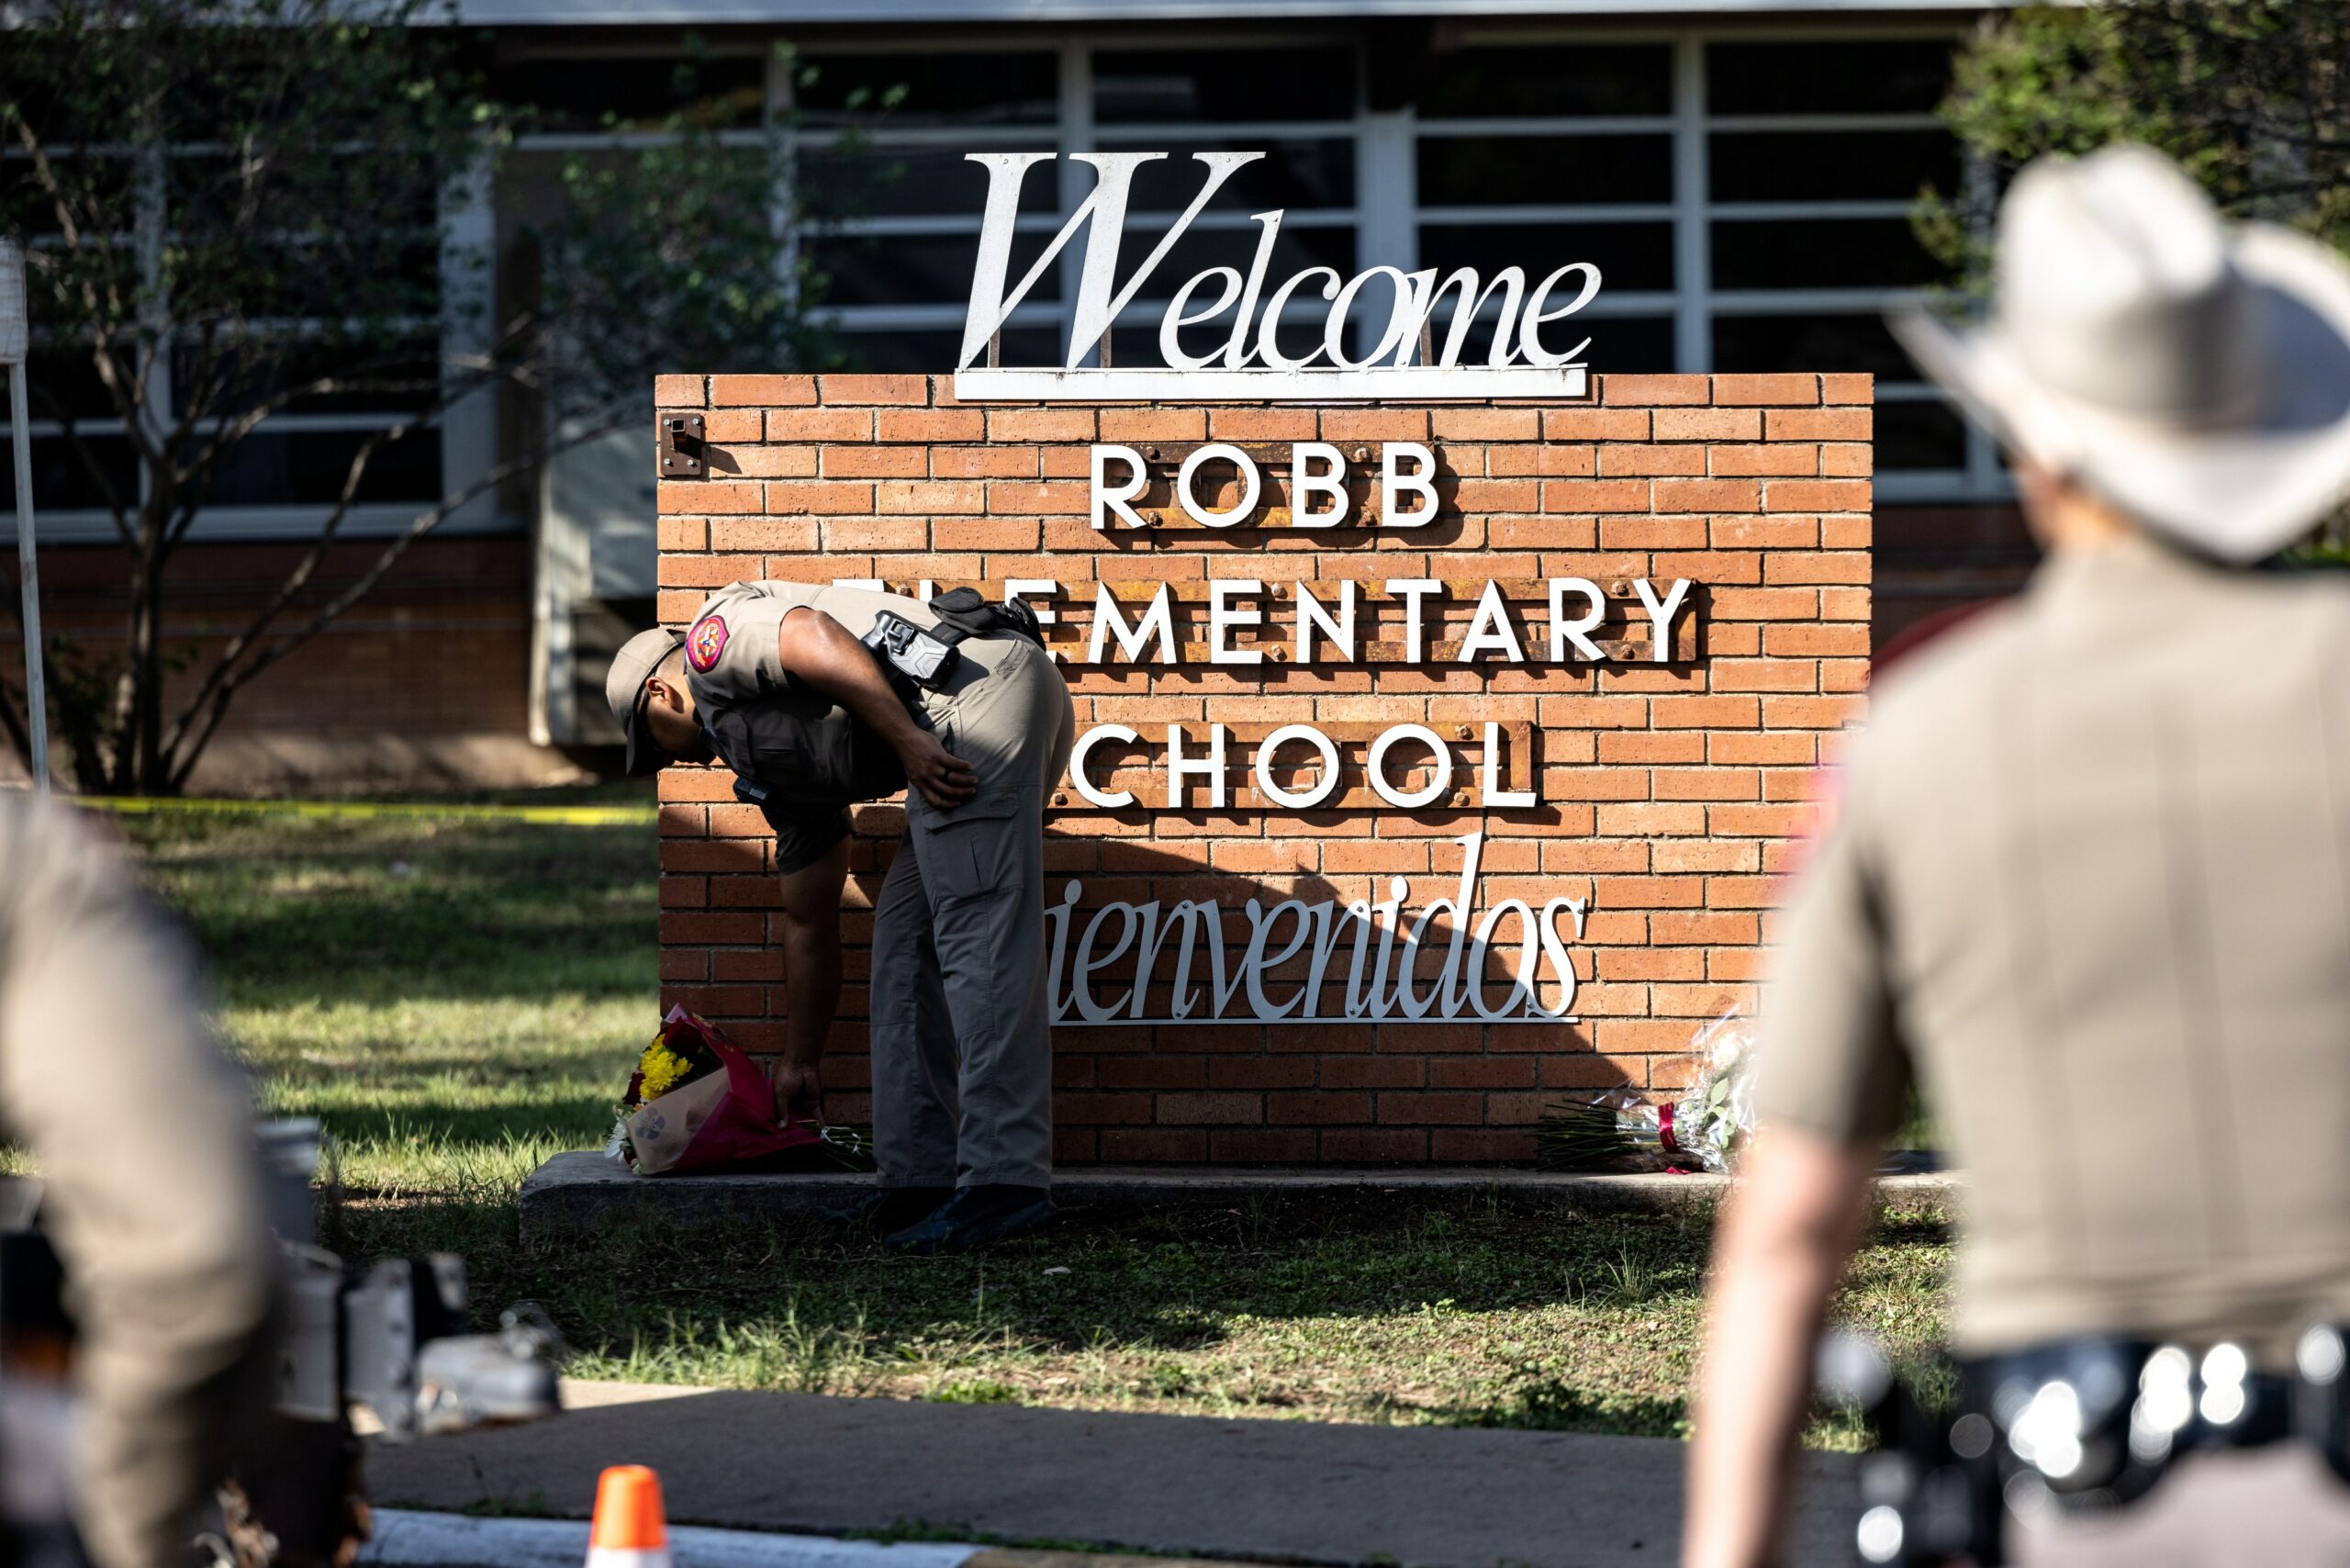 The latest mass shooting, at Robb Elementary School in Uvalde, Texas, has plunged the country into yet another cycle of collective trauma.